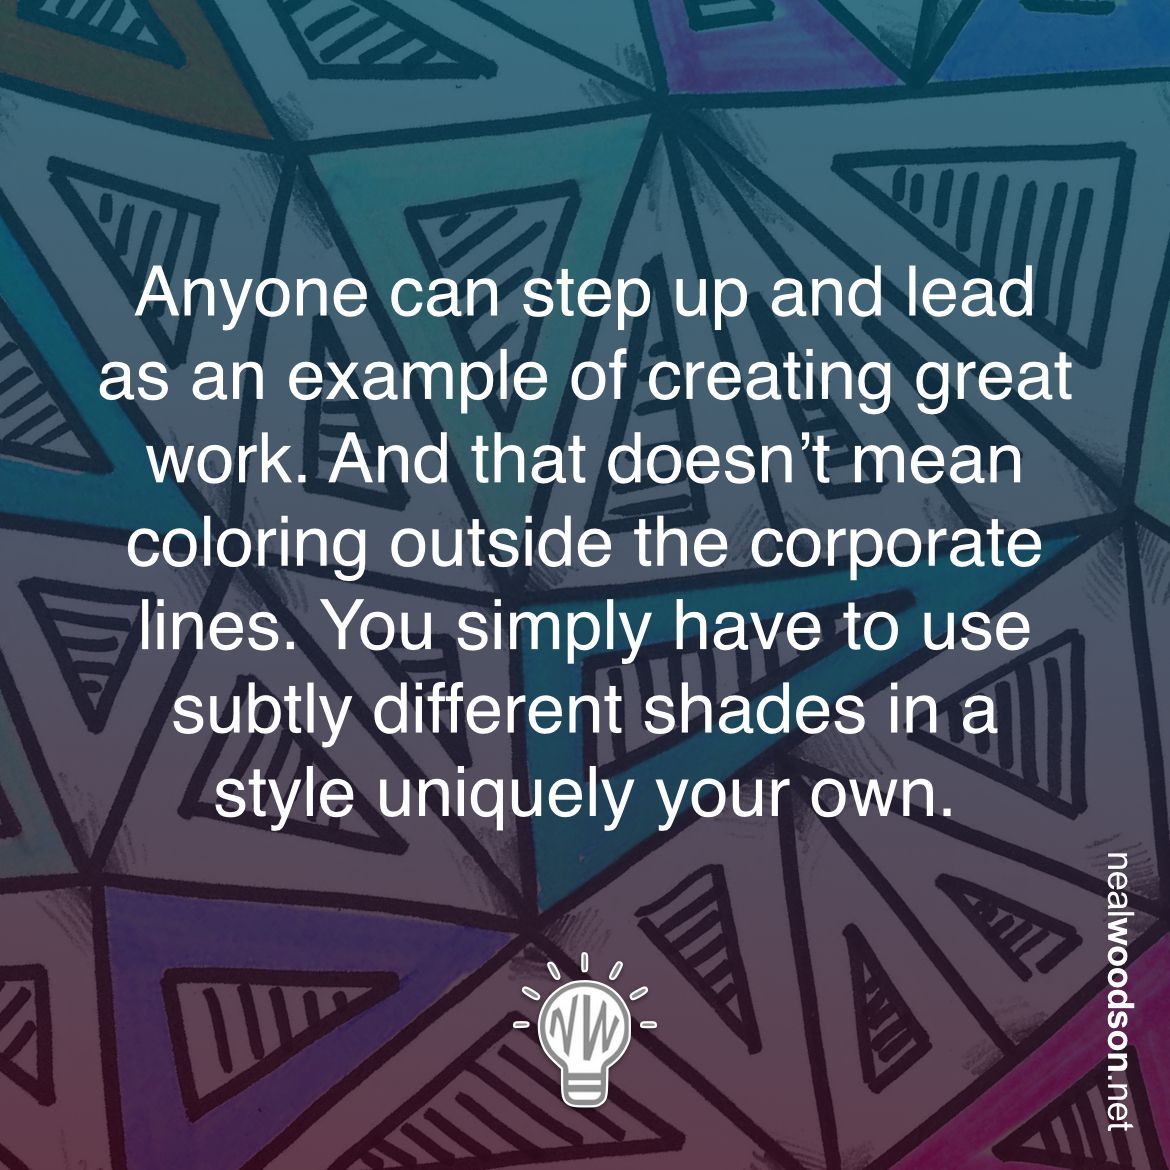 Anyone can step up and lead as an example of creating great work. And that doesn’t mean coloring outside the corporate lines. You simply have to use subtly different shades in a style uniquely your own.
#art #originality #humanexperience